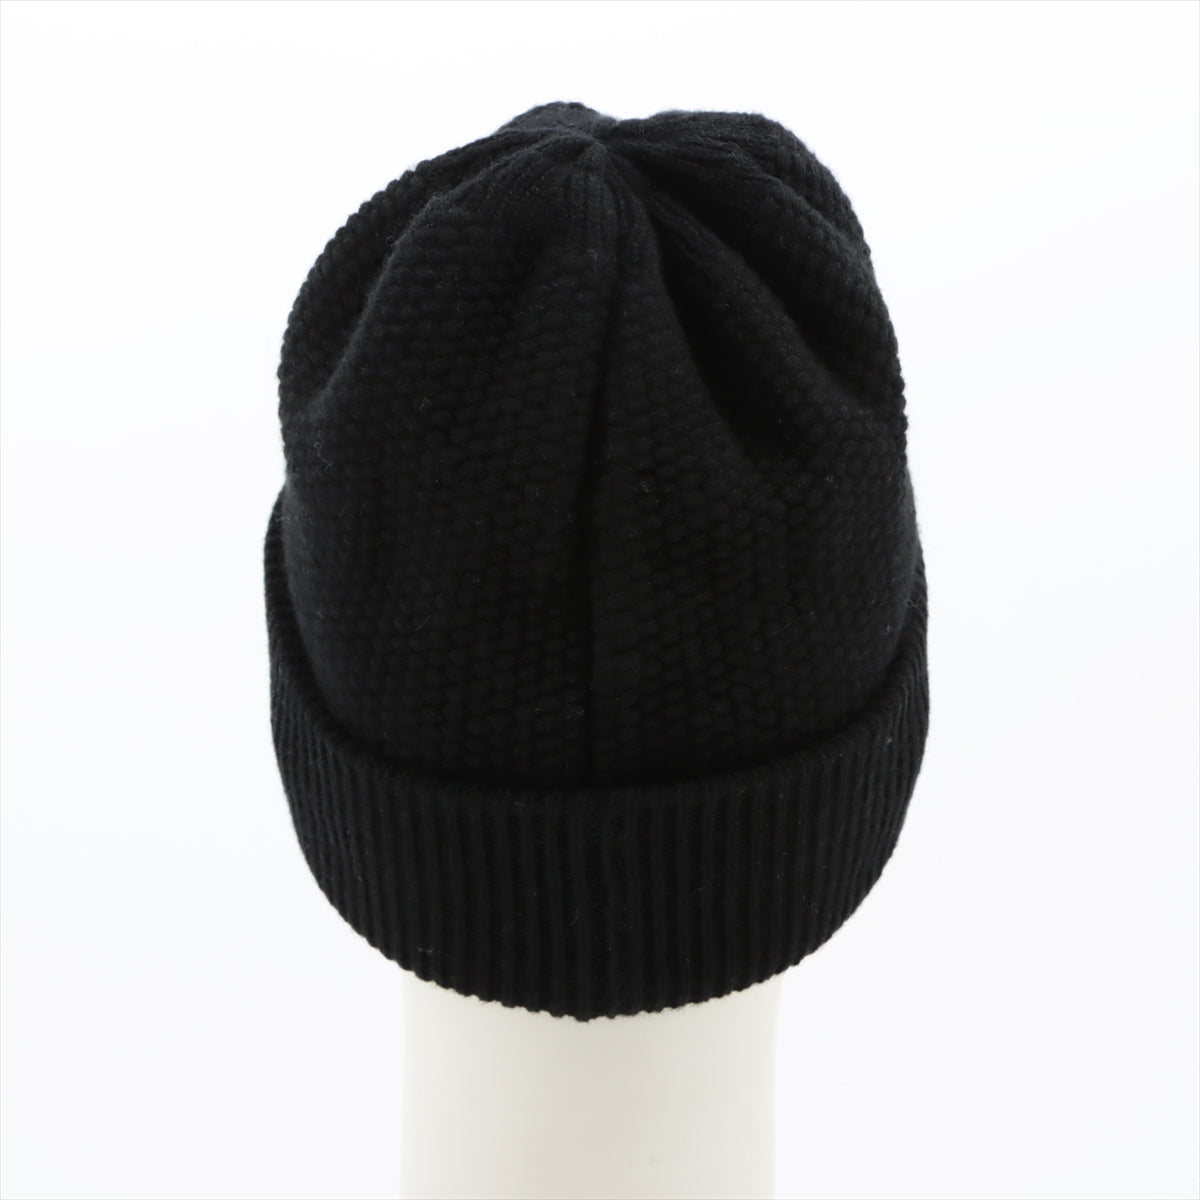 Chanel Coco Mark 23A Knit cap Cashmere Black x pink